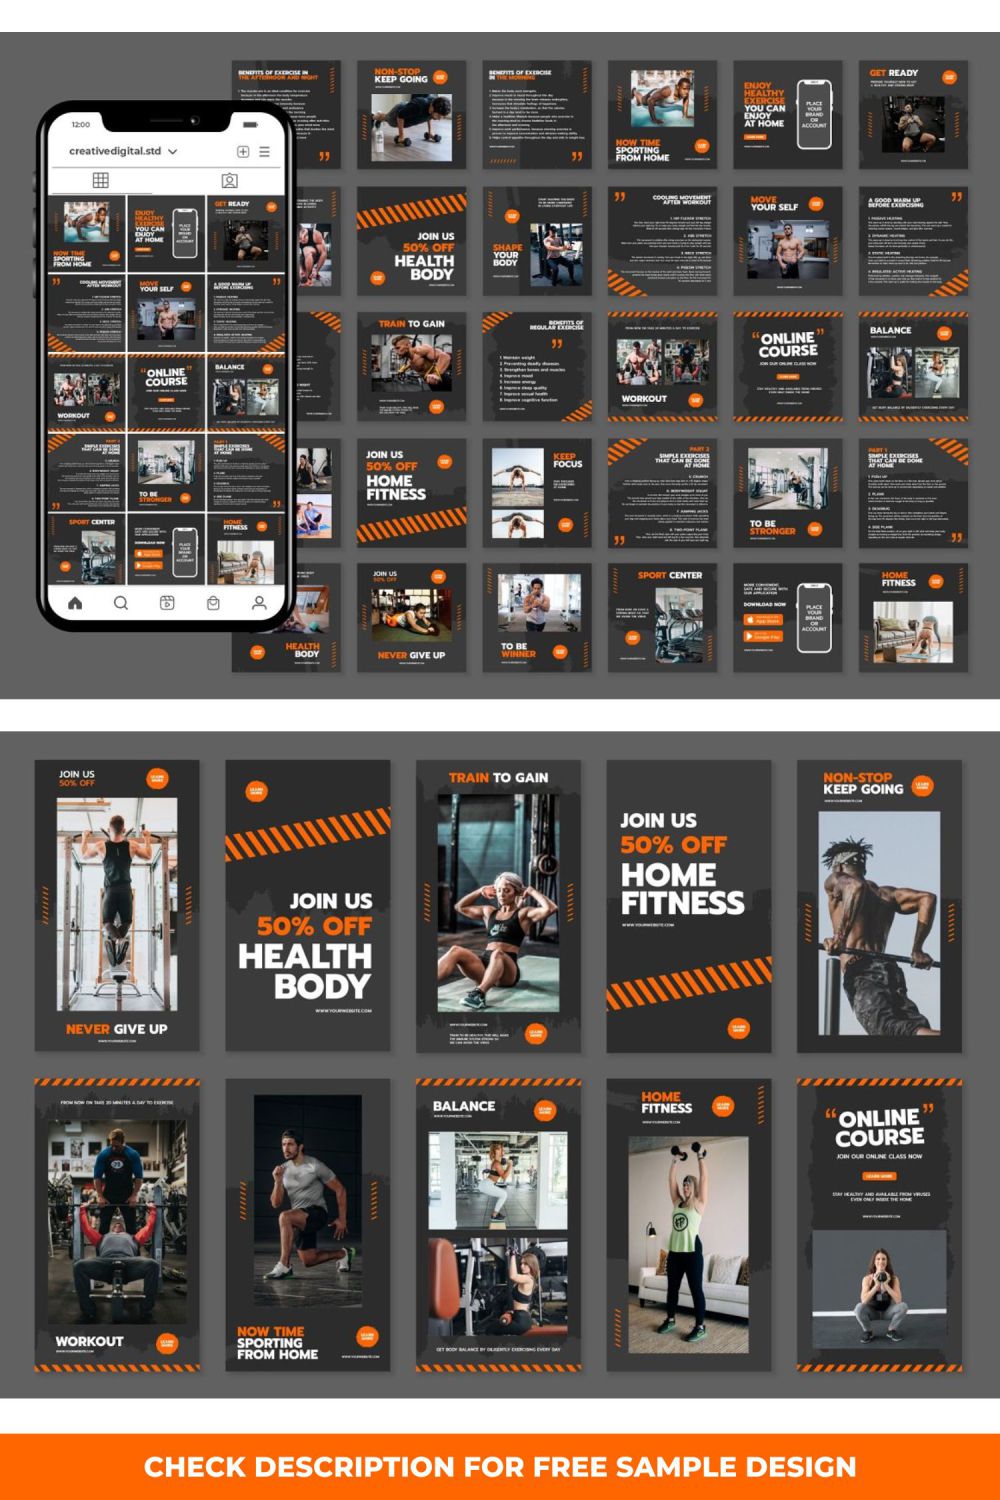 Home Fitness Story and Icon Social Media Template Canva Photoshop Illustrator Pinterest Image.